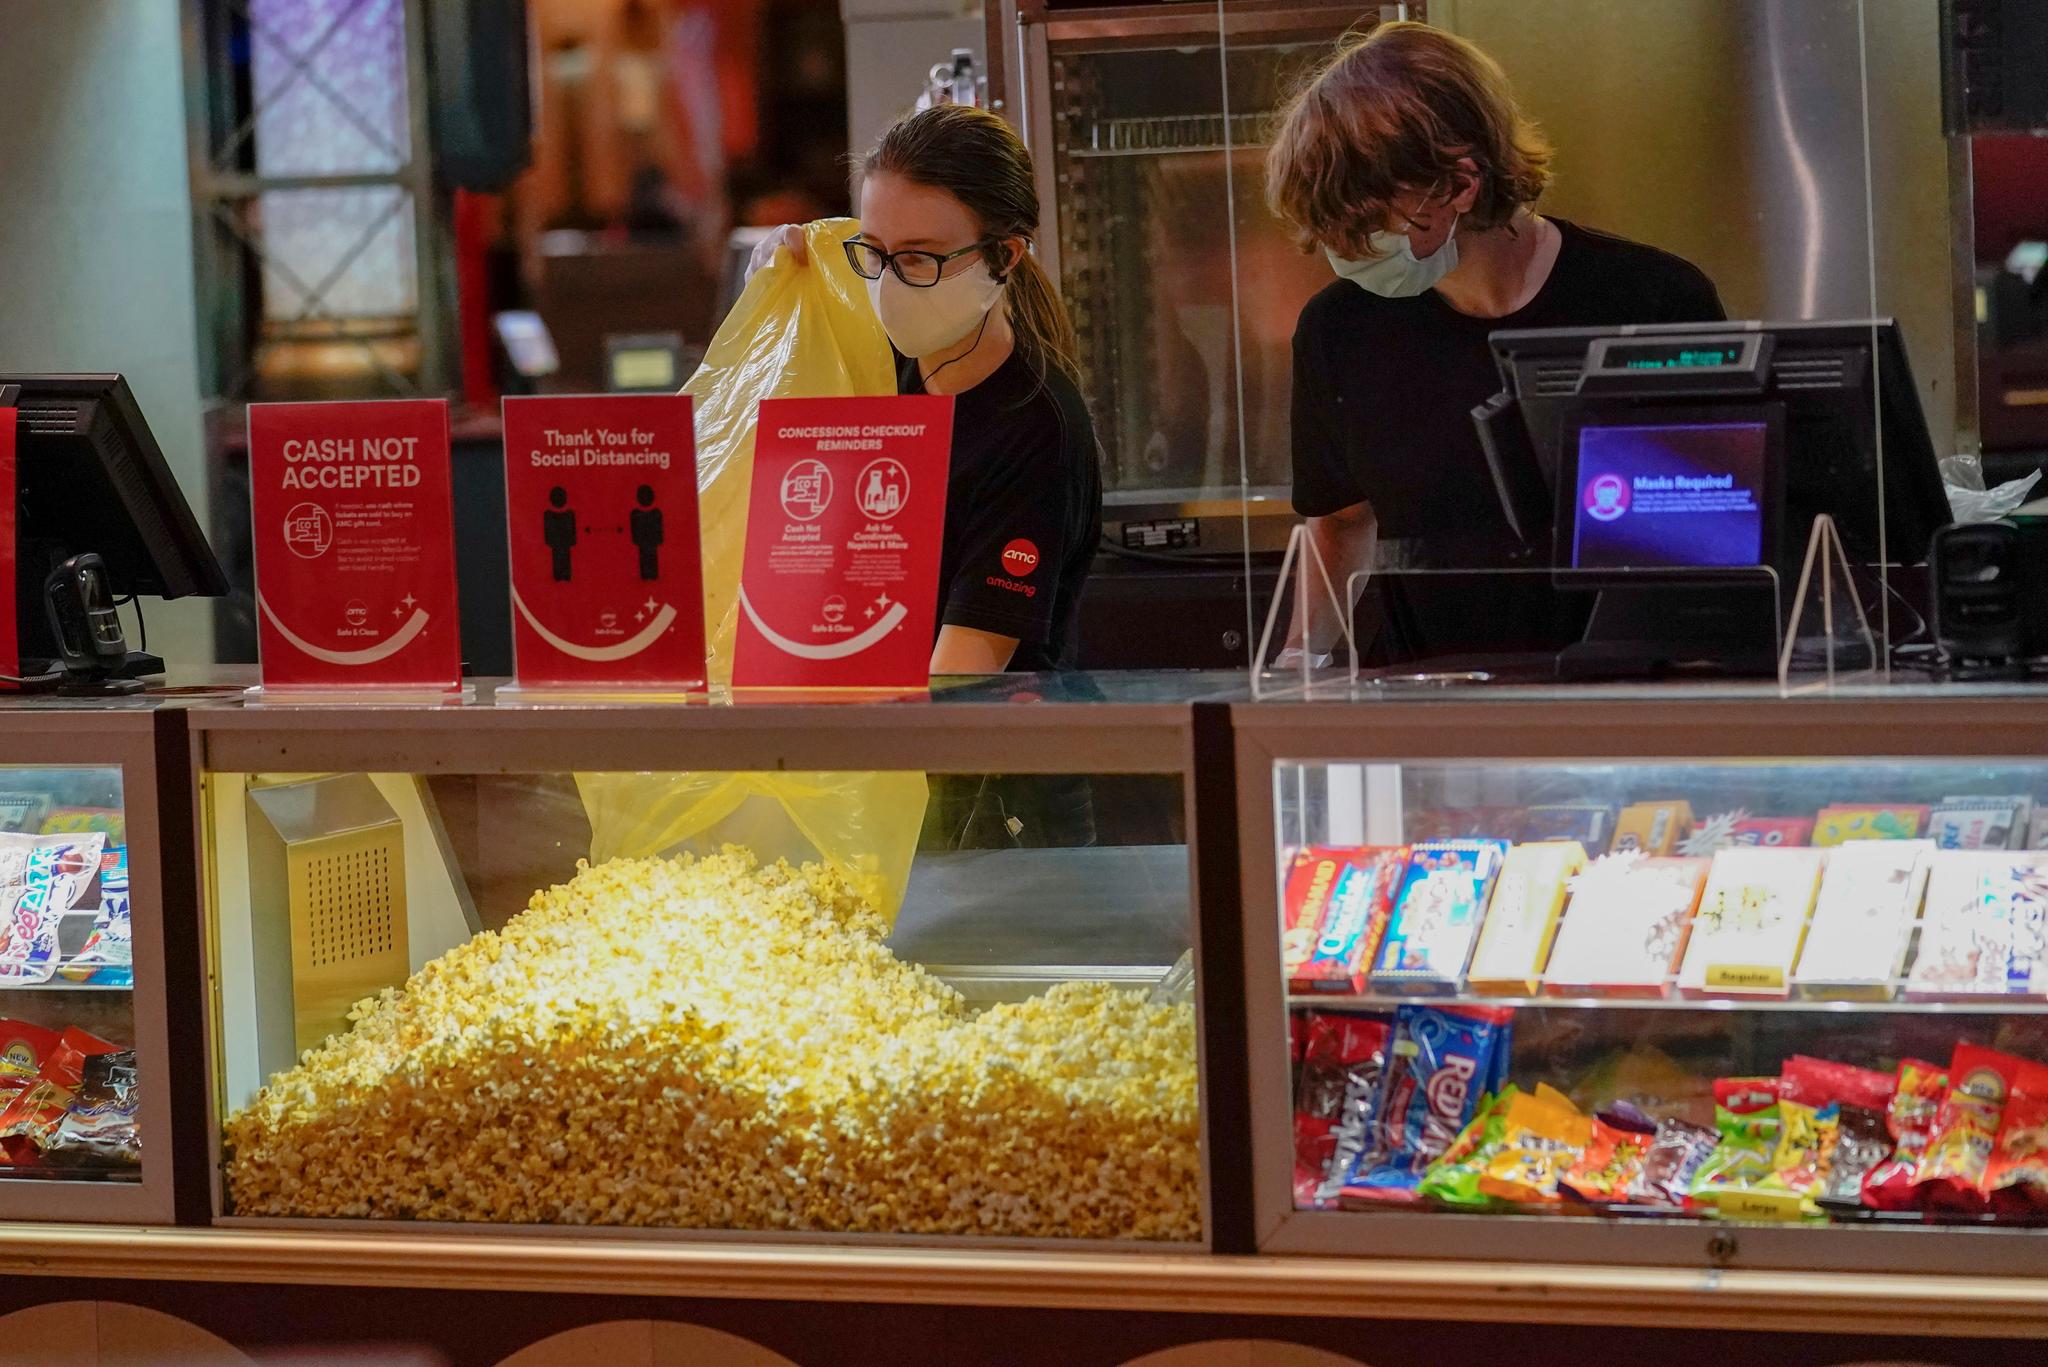 Concessions workers stock the bins with popcorn and other treats